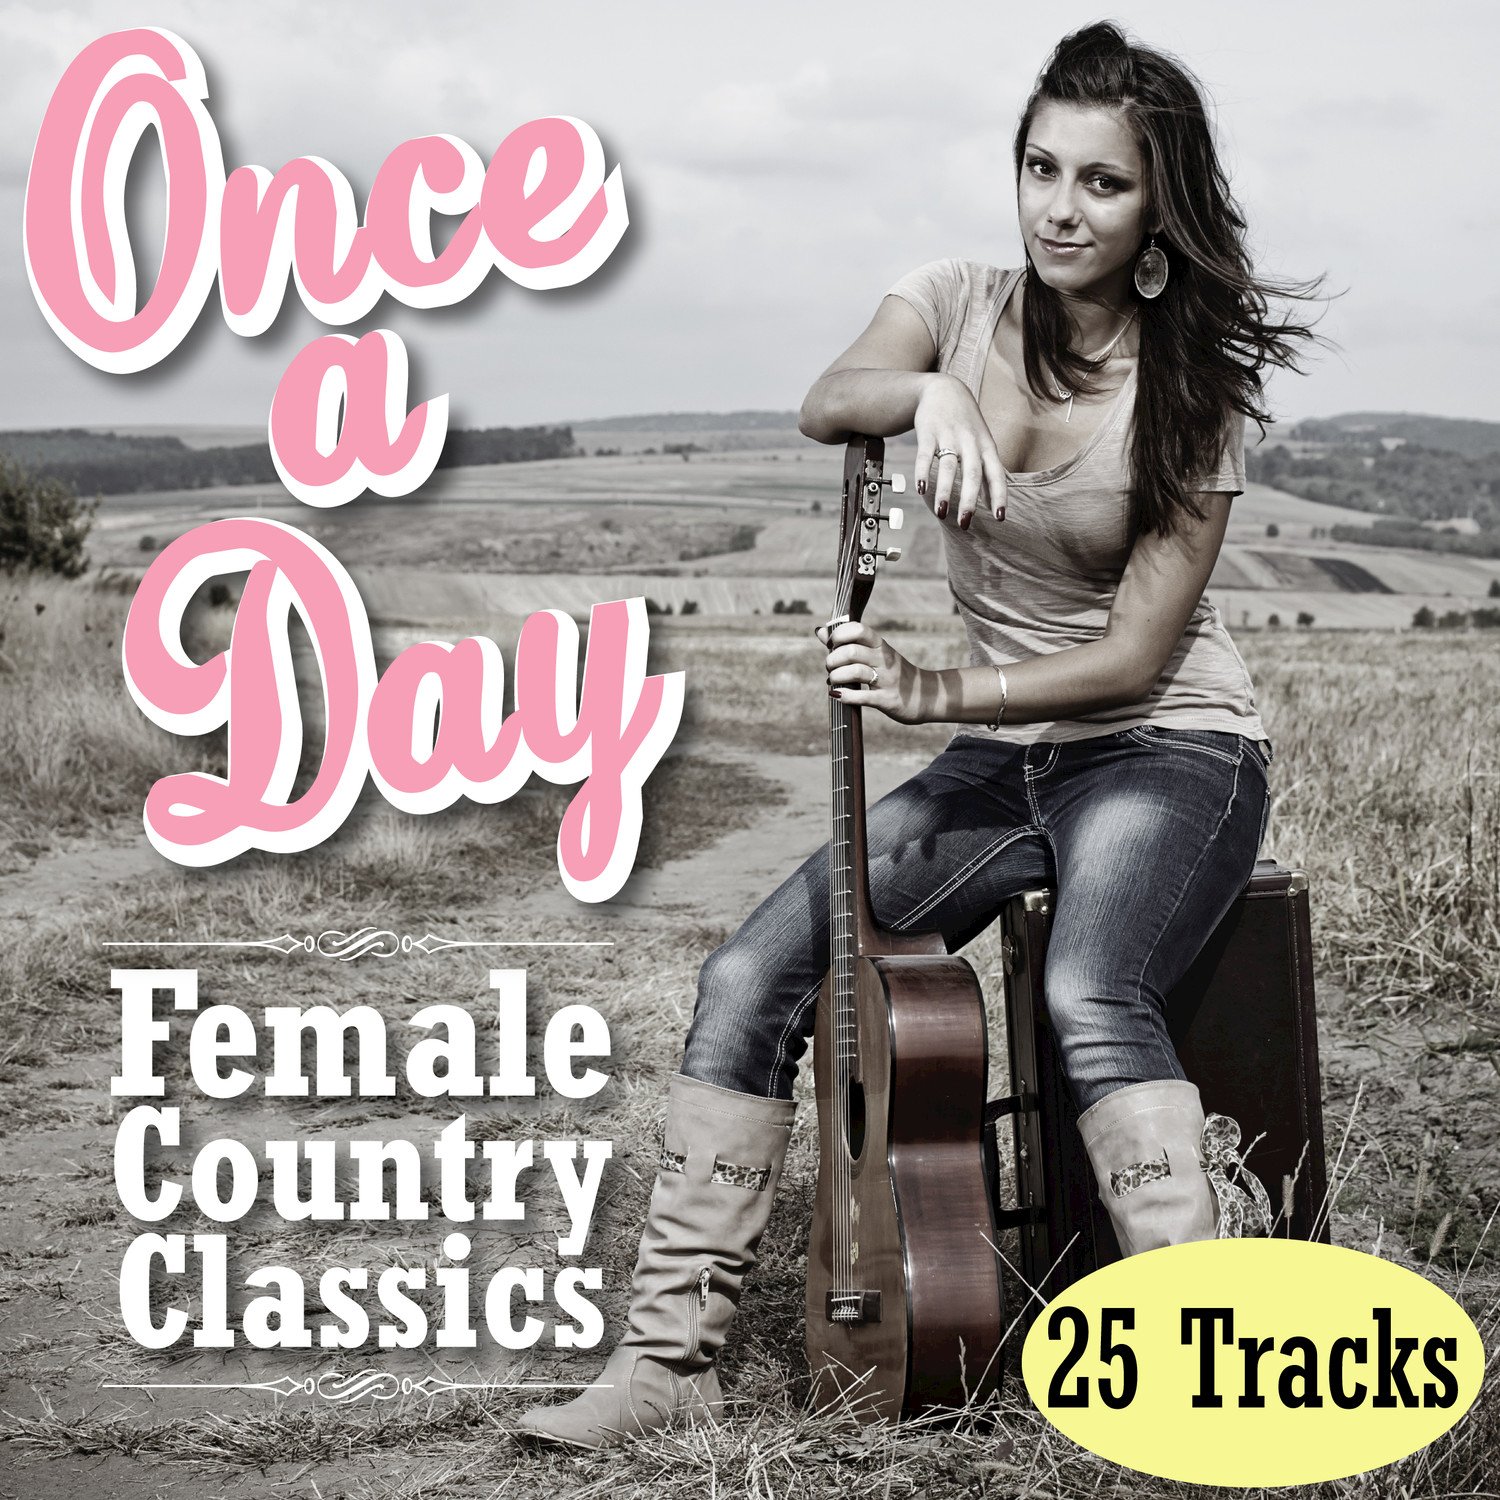 Once a Day - Female Country Classics